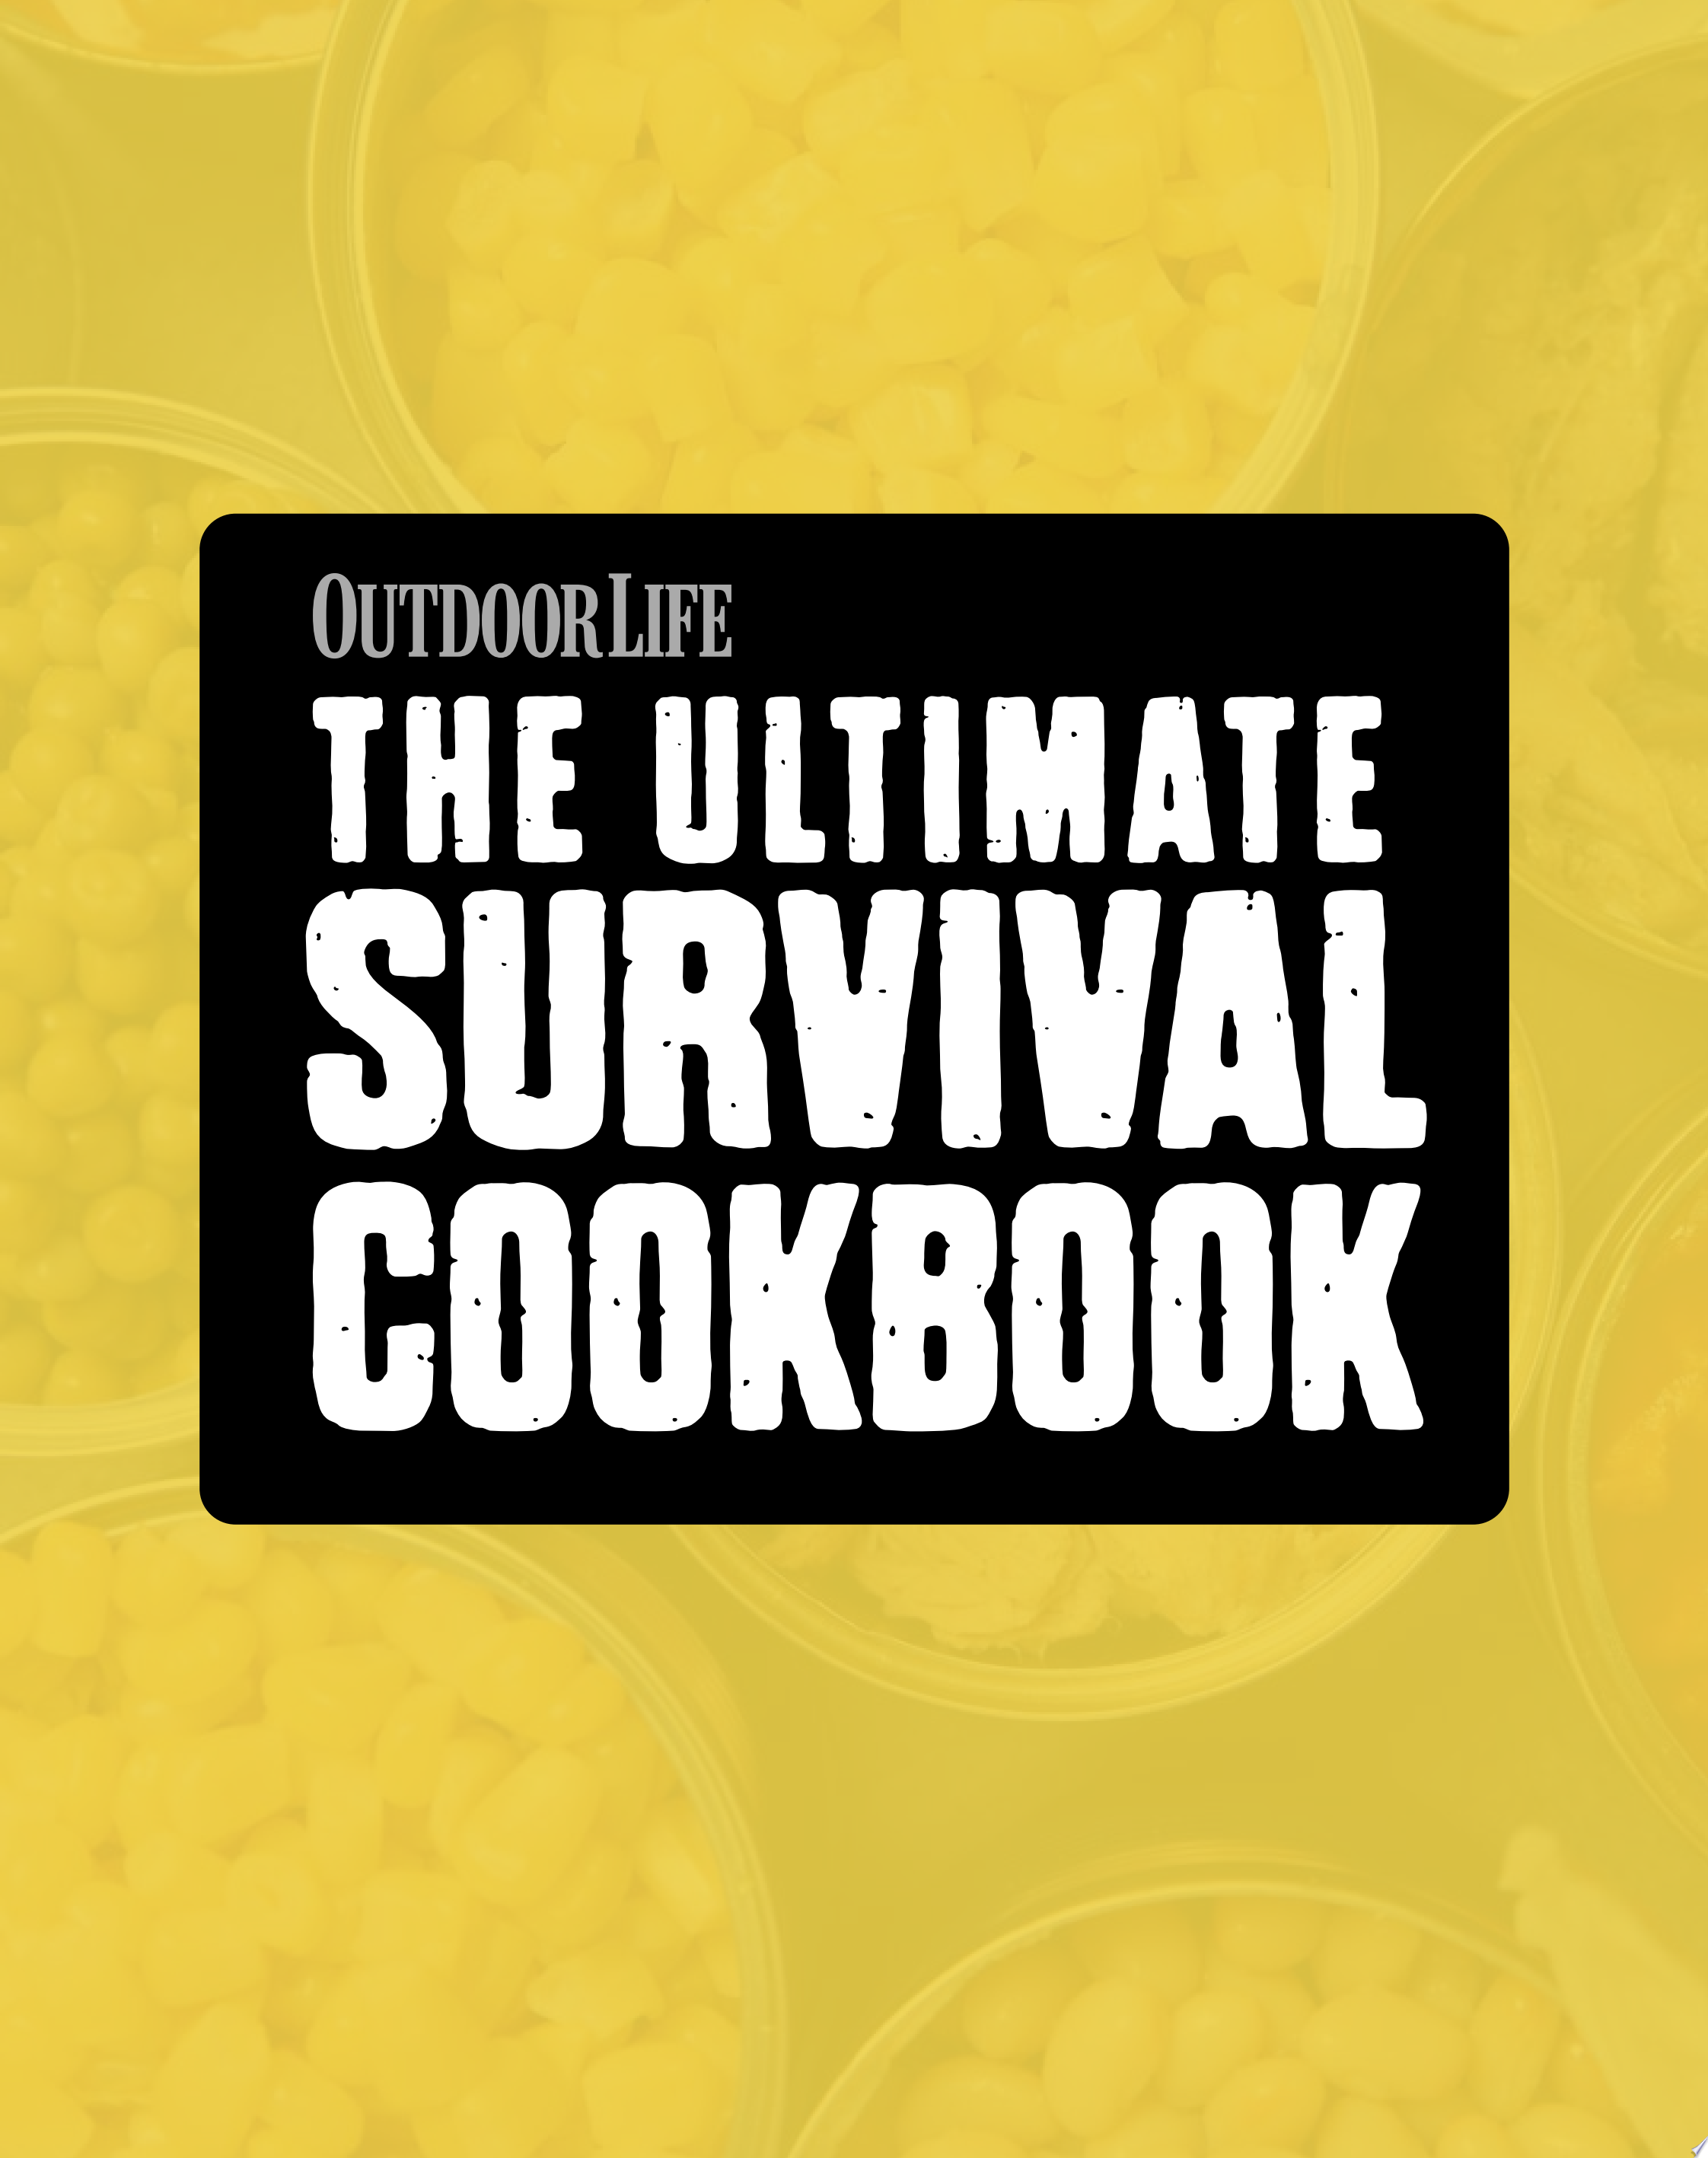 Image for "The Ultimate Survival Cookbook: 200+ Easy Meal-Prep Strategies for Making"